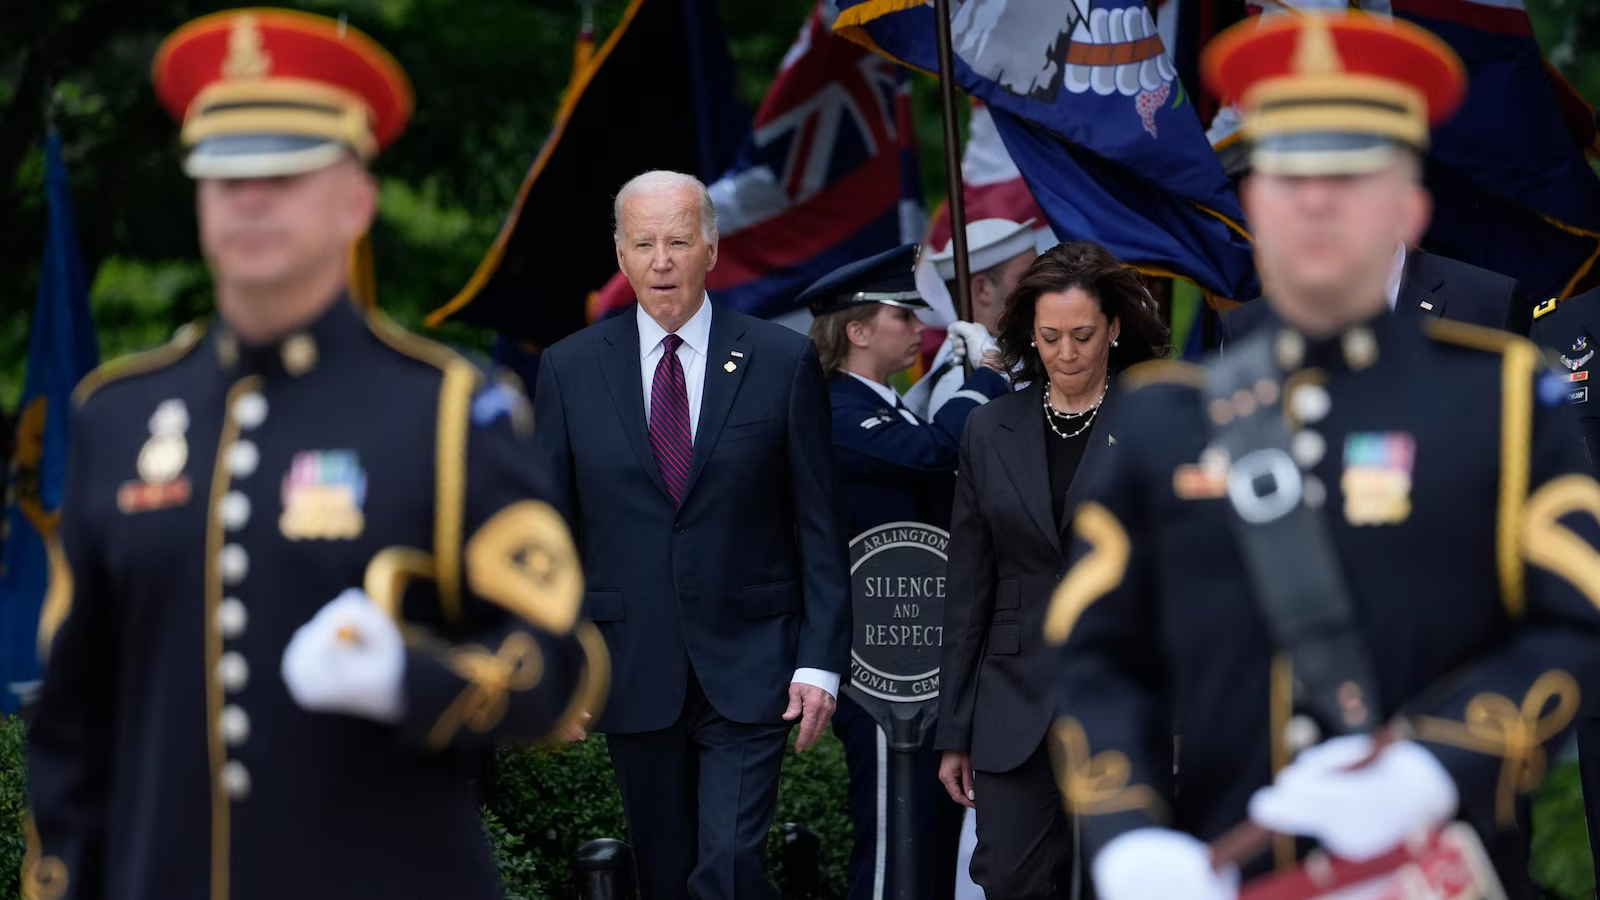 Biden says each generation has to 'earn' freedom, in solemn Memorial Day remarks